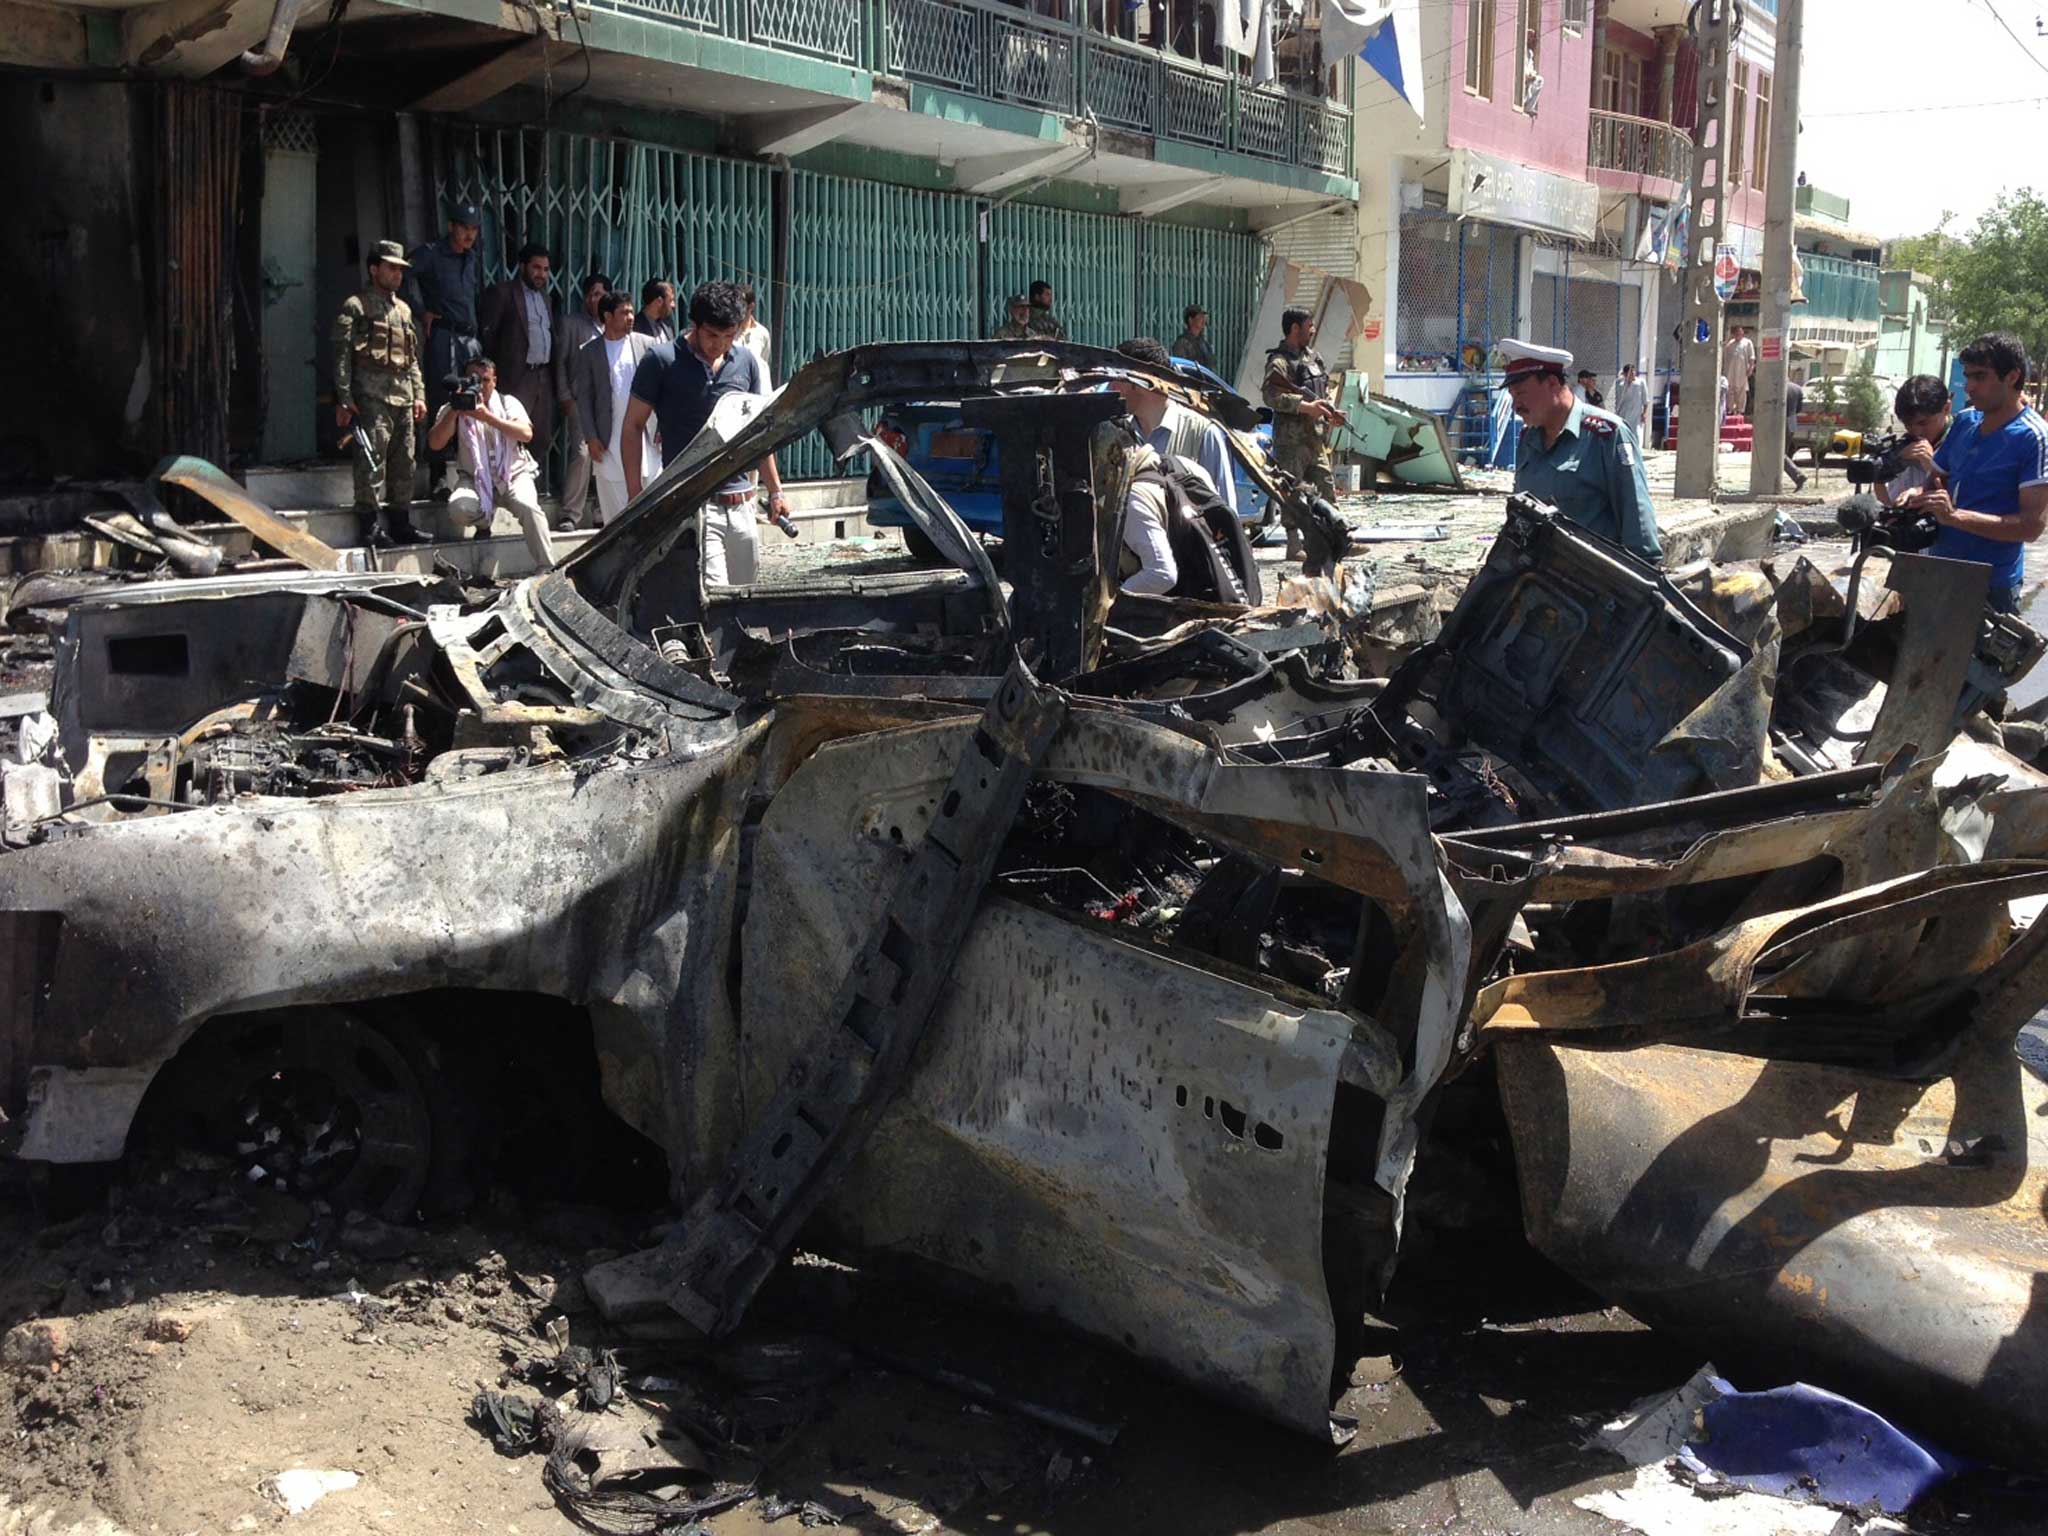 Afghan security and media representatives gather at the scene of the explosion in Kabul